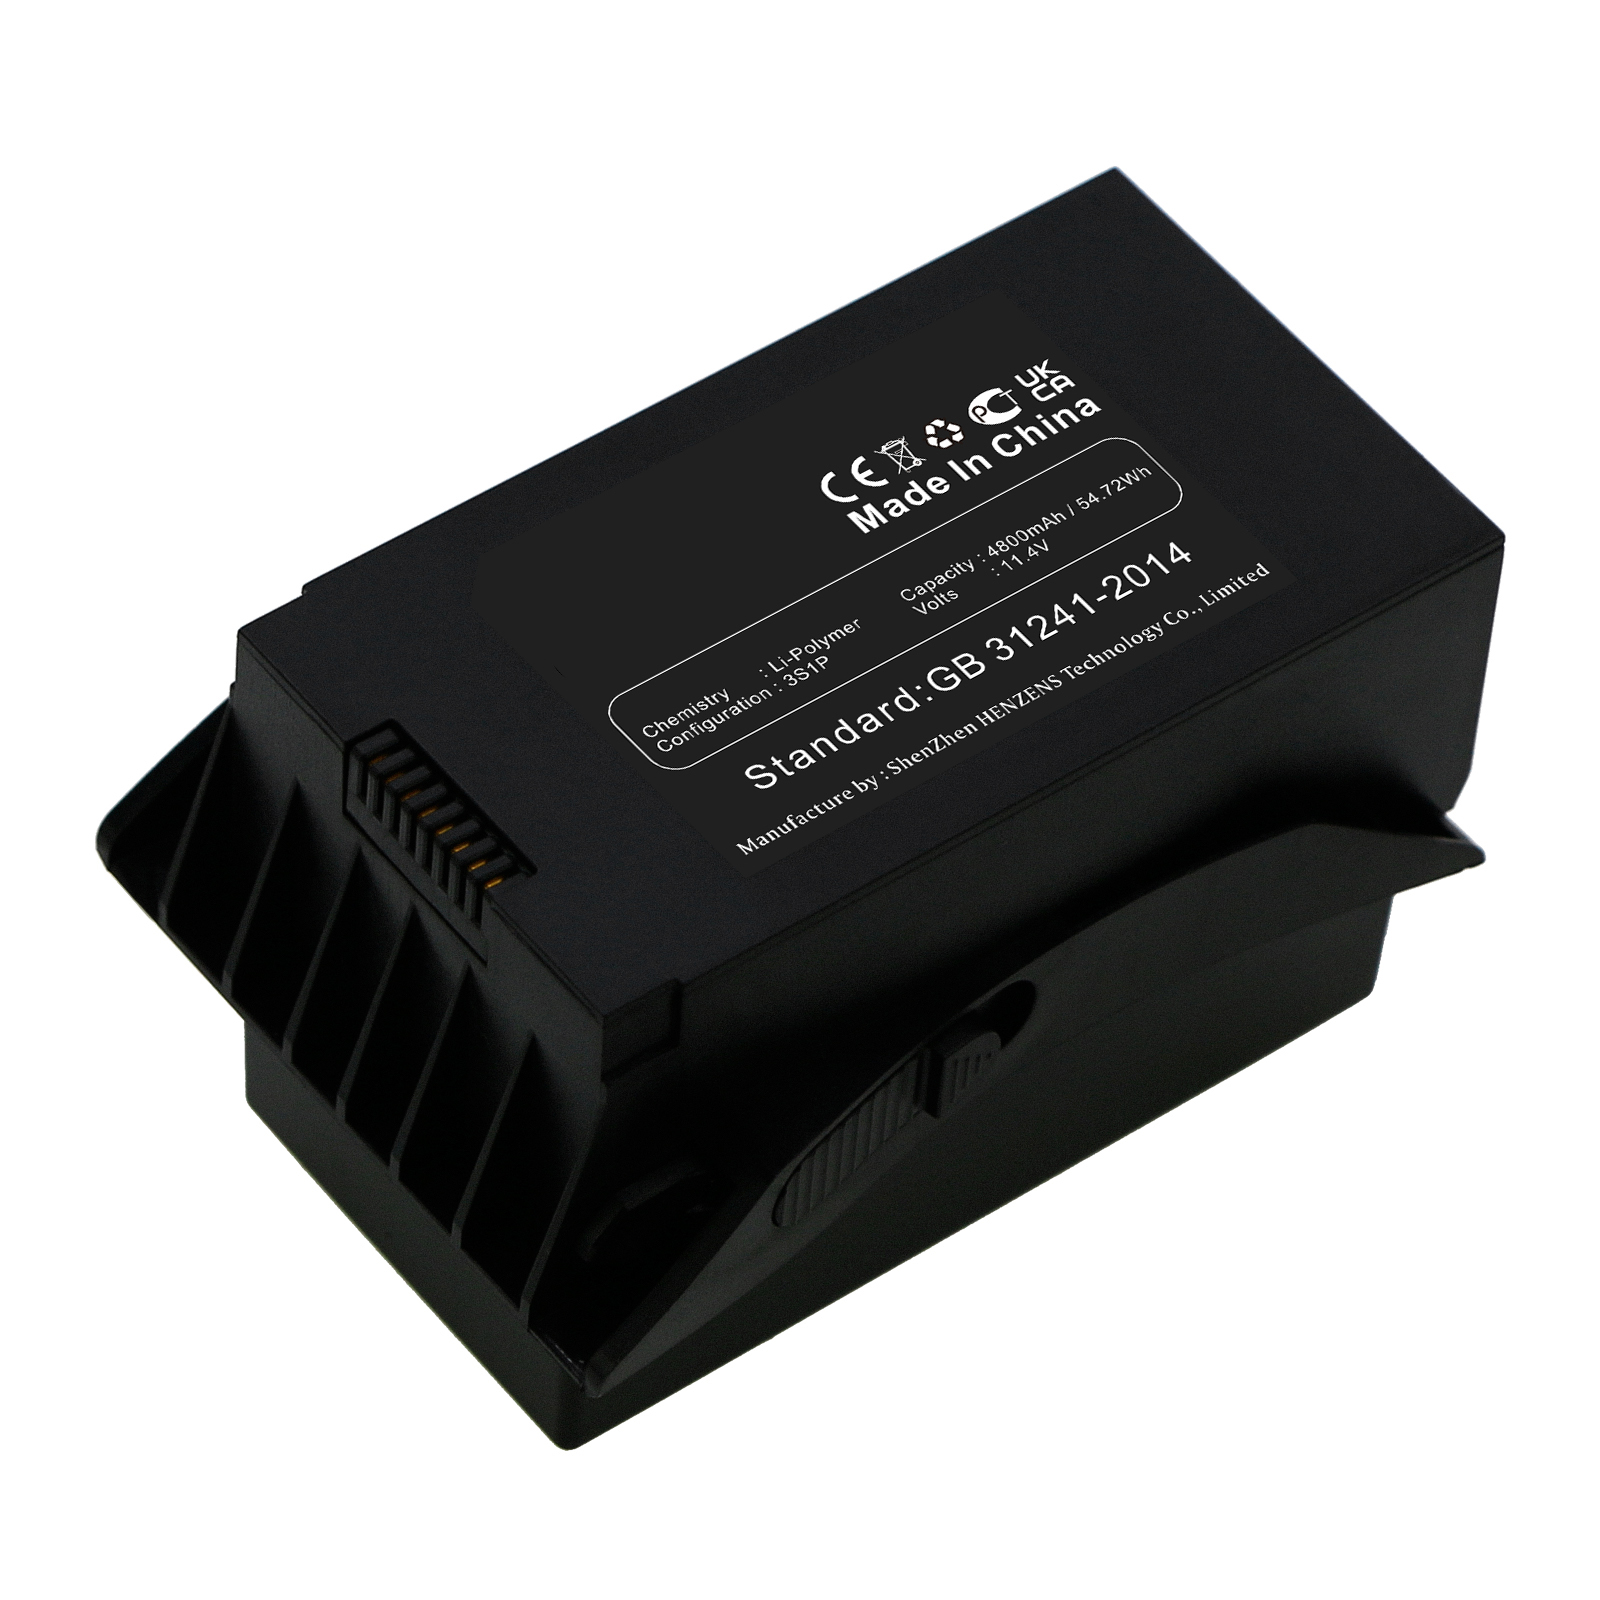 Synergy Digital Drone Battery, Compatible with Eachine D01011 Drone Battery (Li-Pol, 11.4V, 4800mAh)